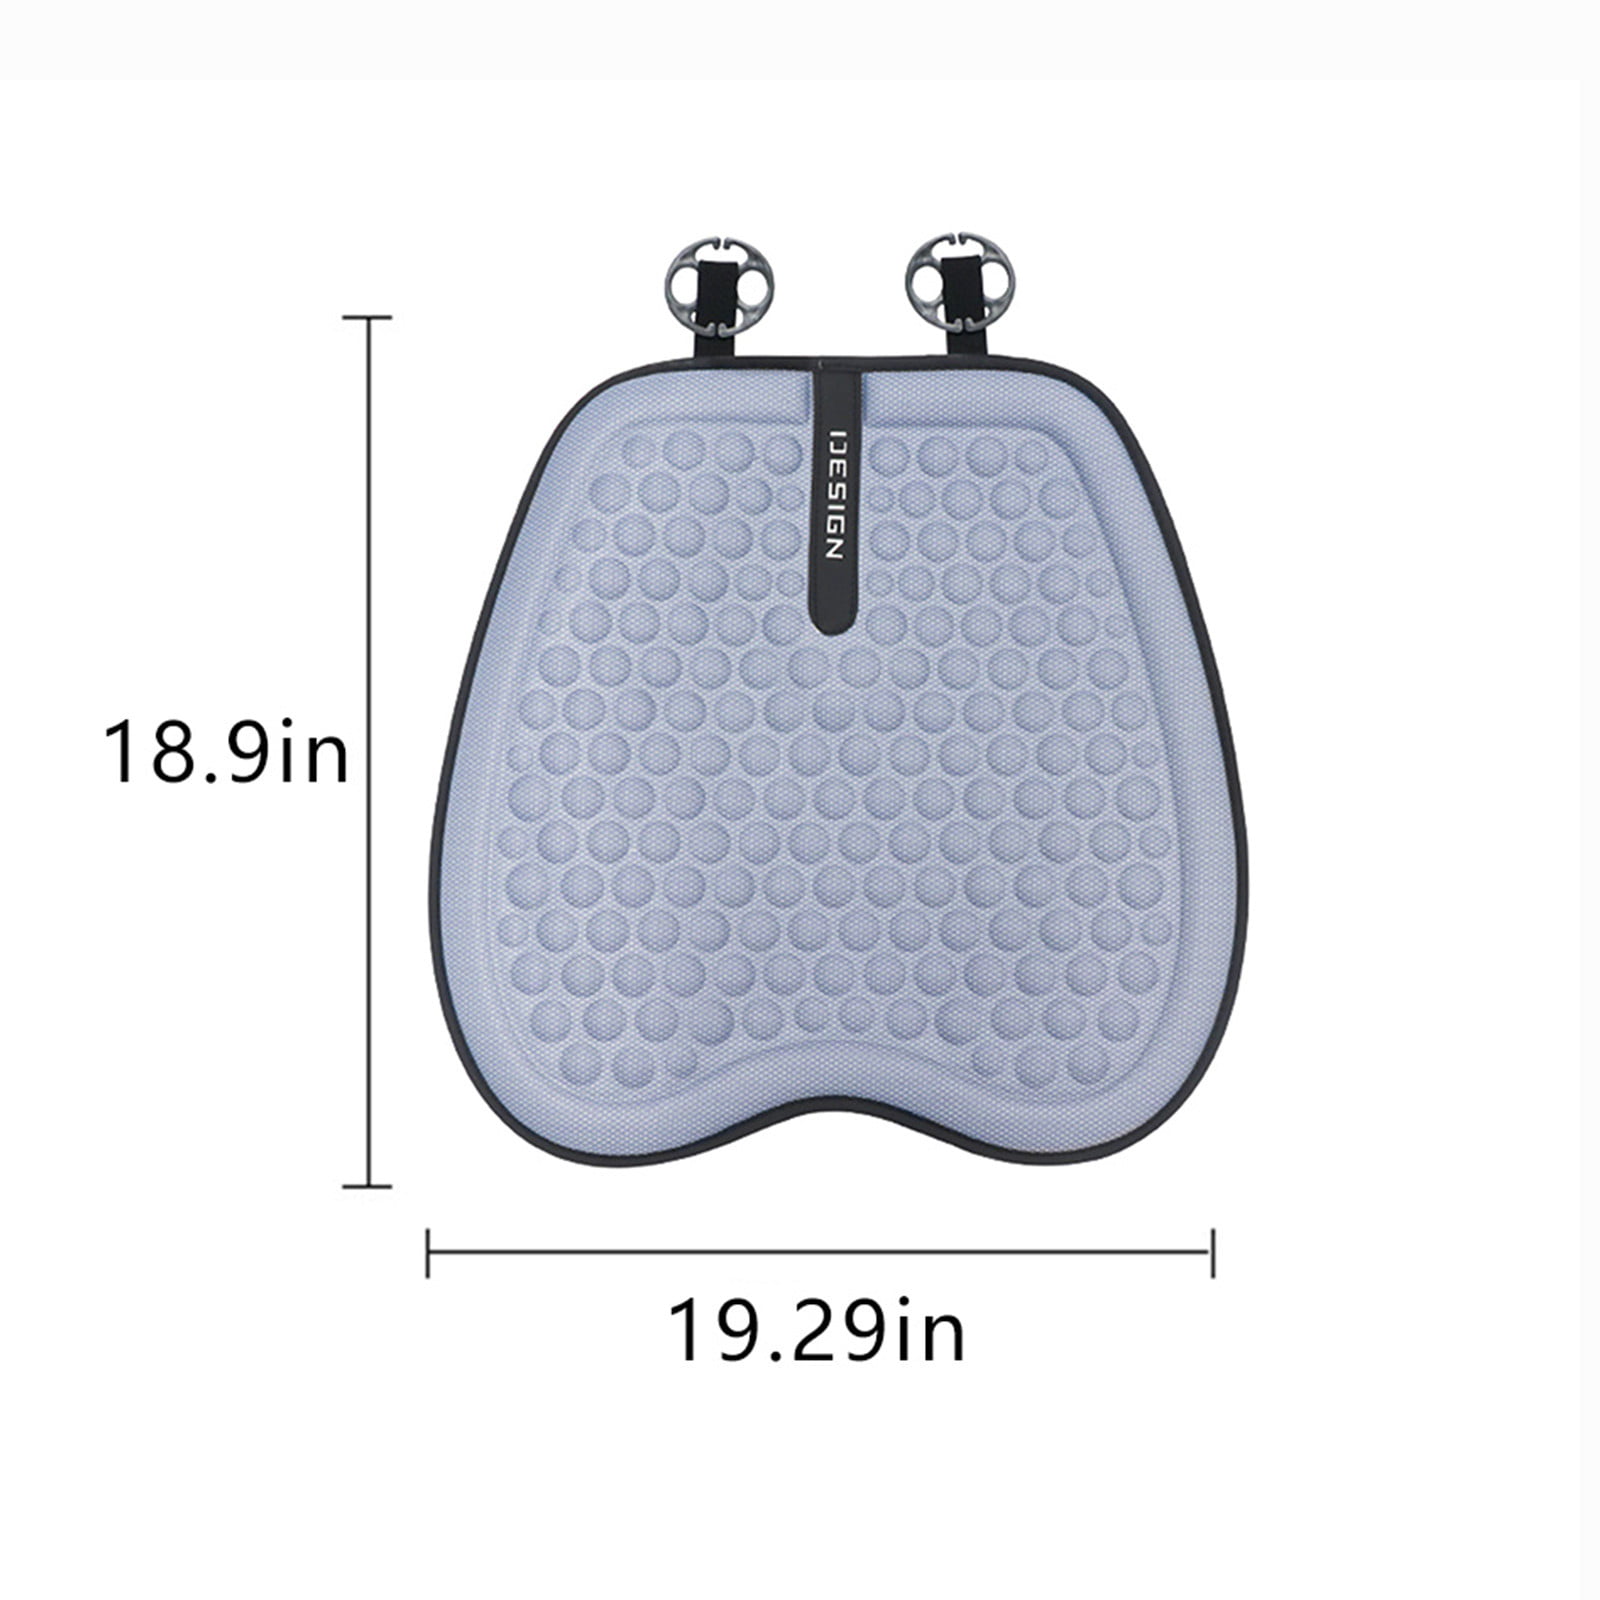 1pc Cartoon Pattern Car Seat Cushion, Four Seasons General Thick Chair  Cushion, Fruit Shaped Breathable Cushion For Driving Learning, Comfortable  & Heighten